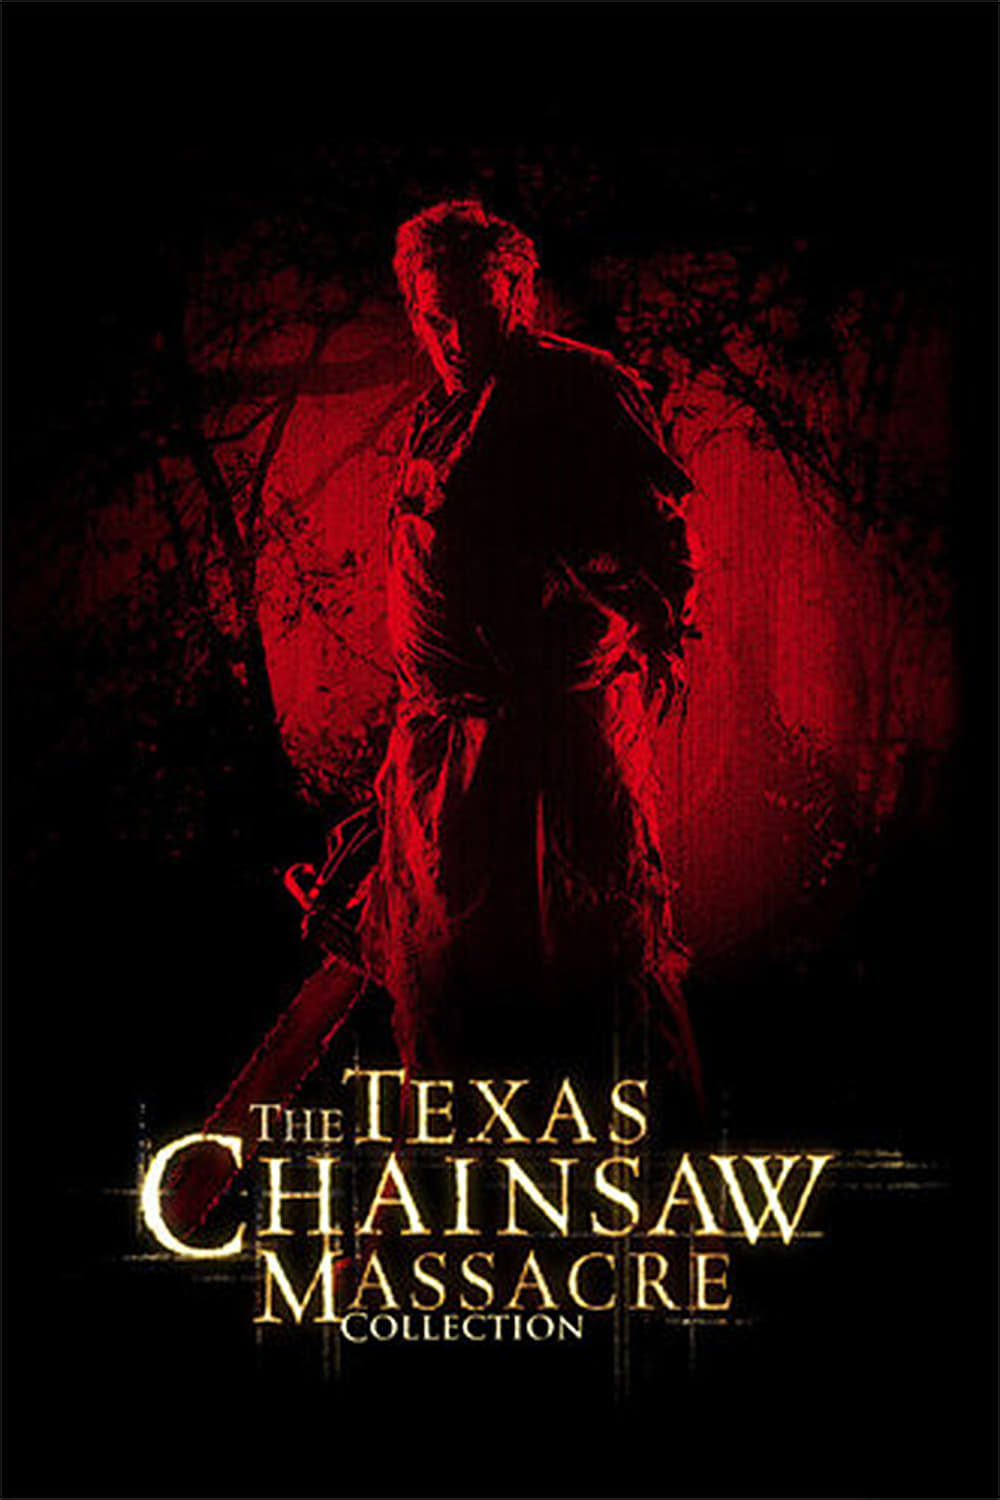 Texas Chainsaw Massacre Movie Collection Dvd Covers